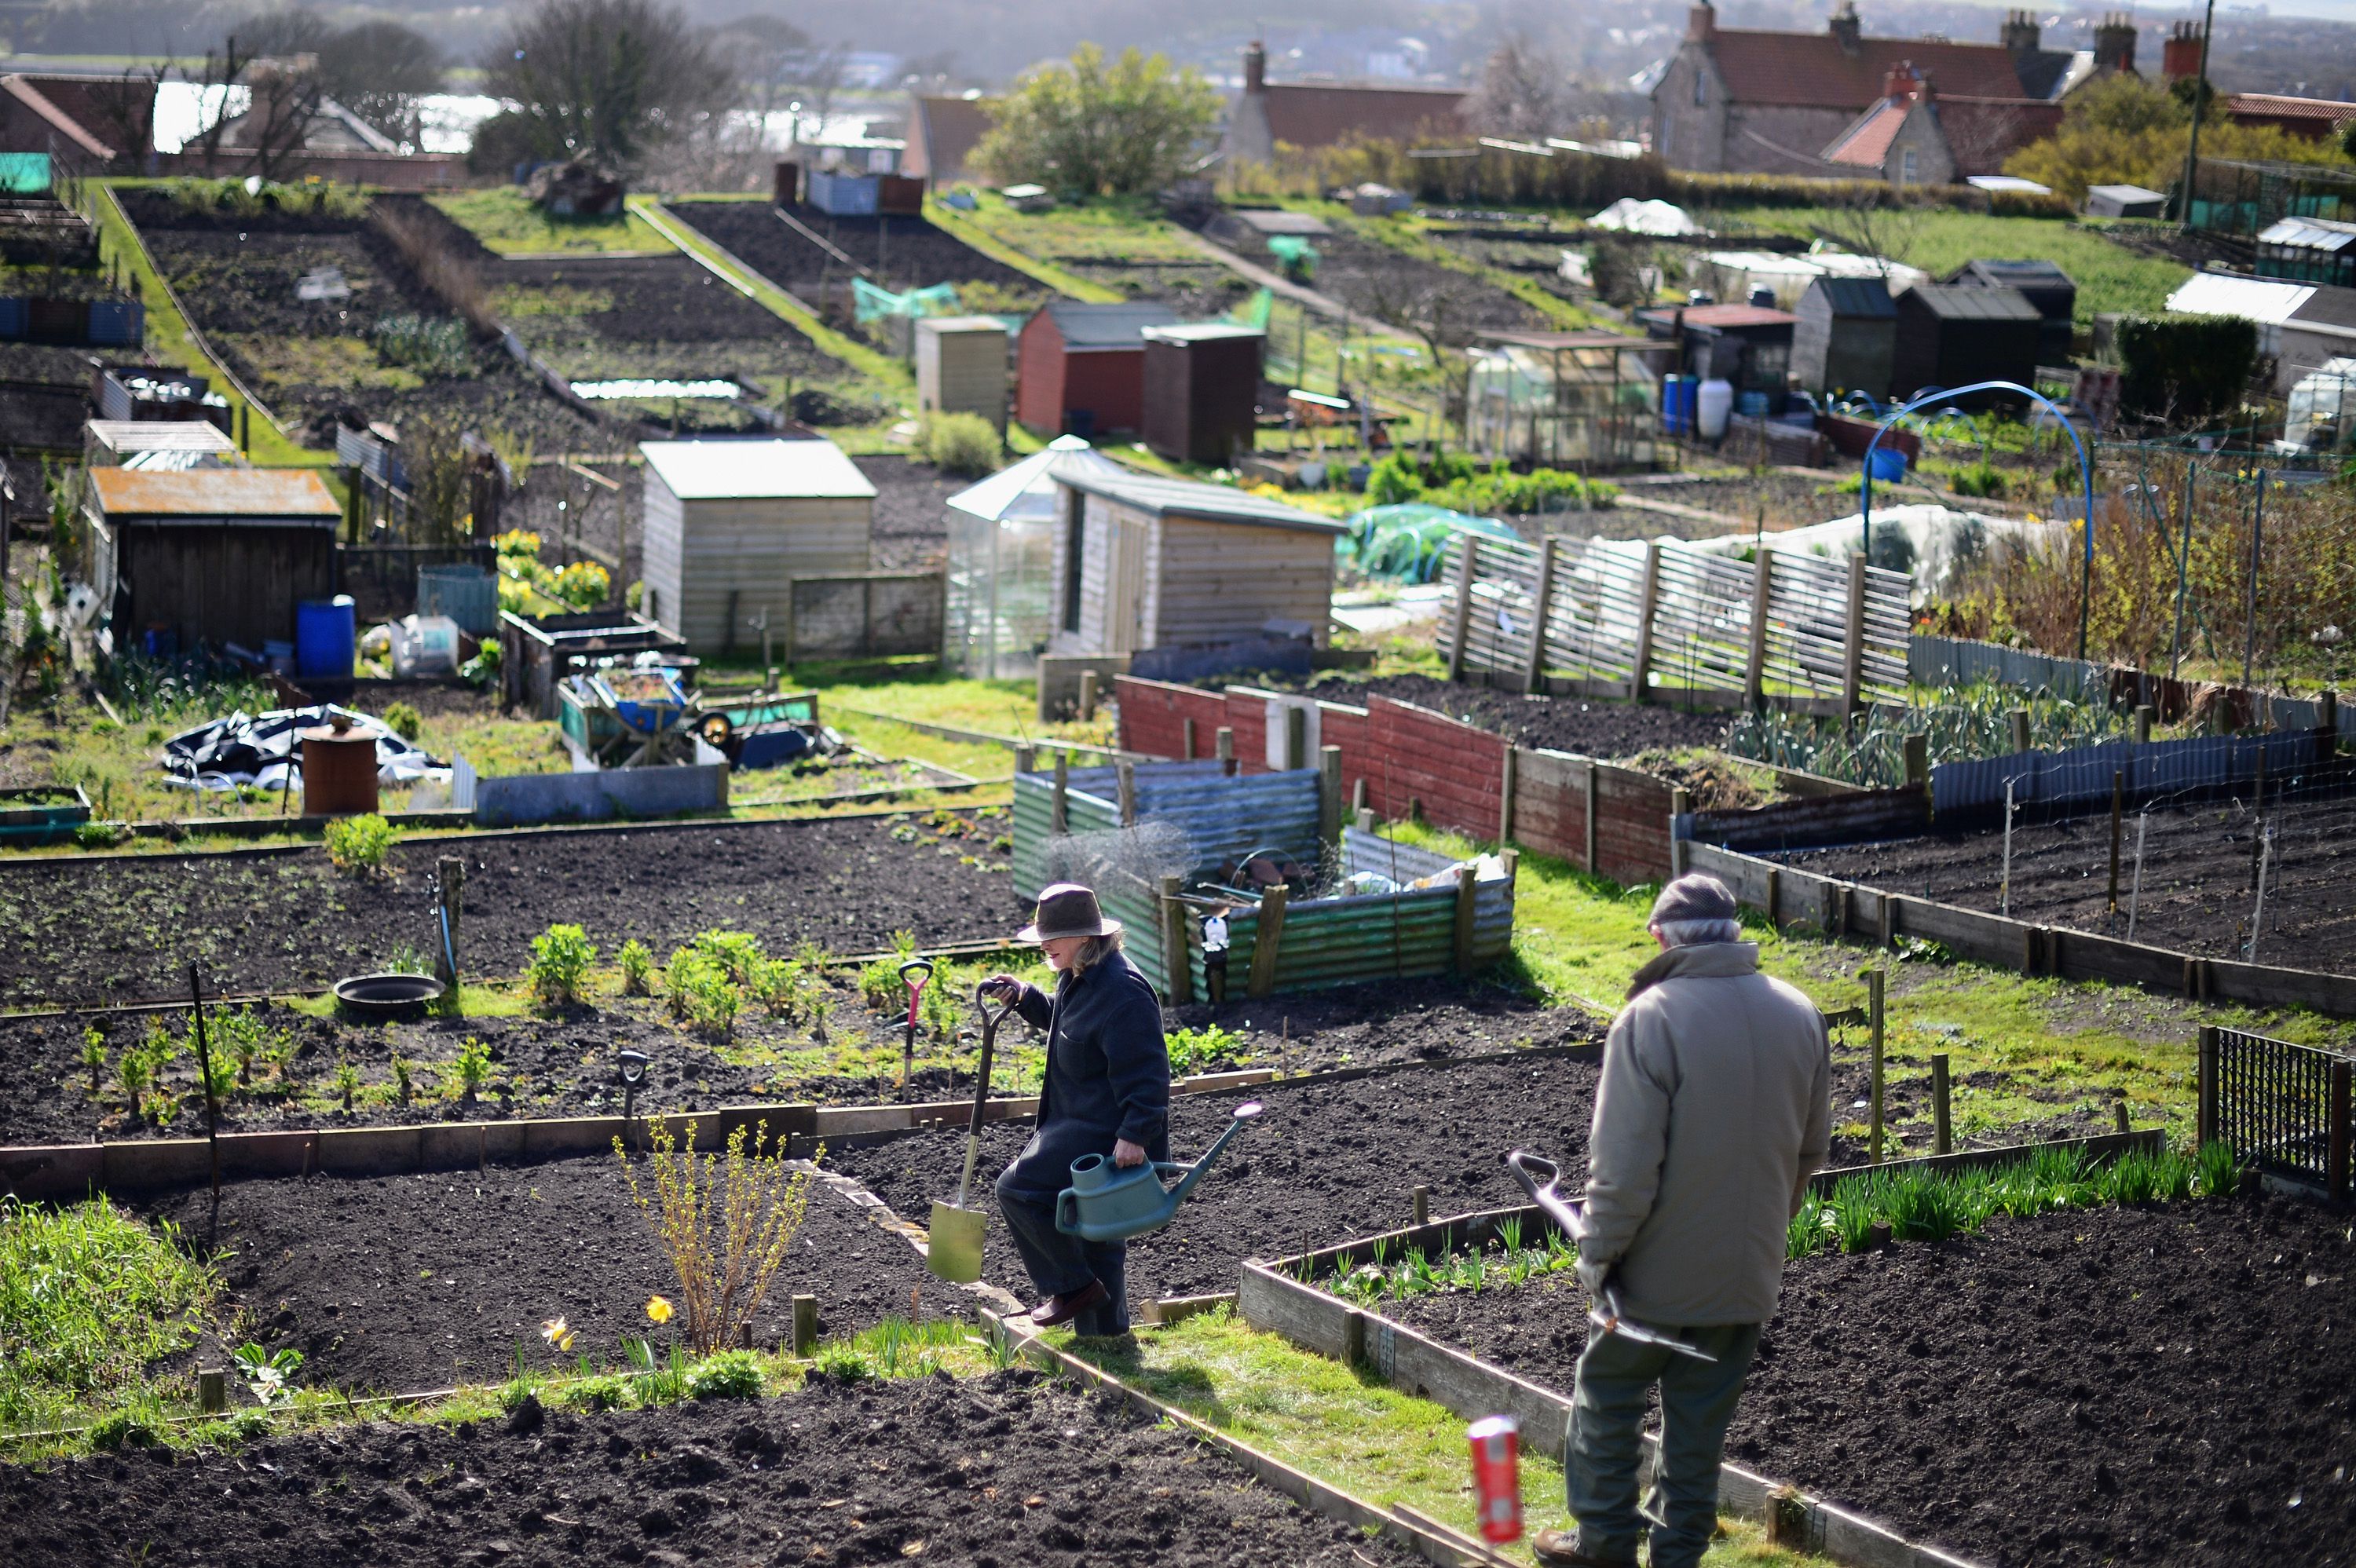 Glossary of British Words: What is an Allotment?